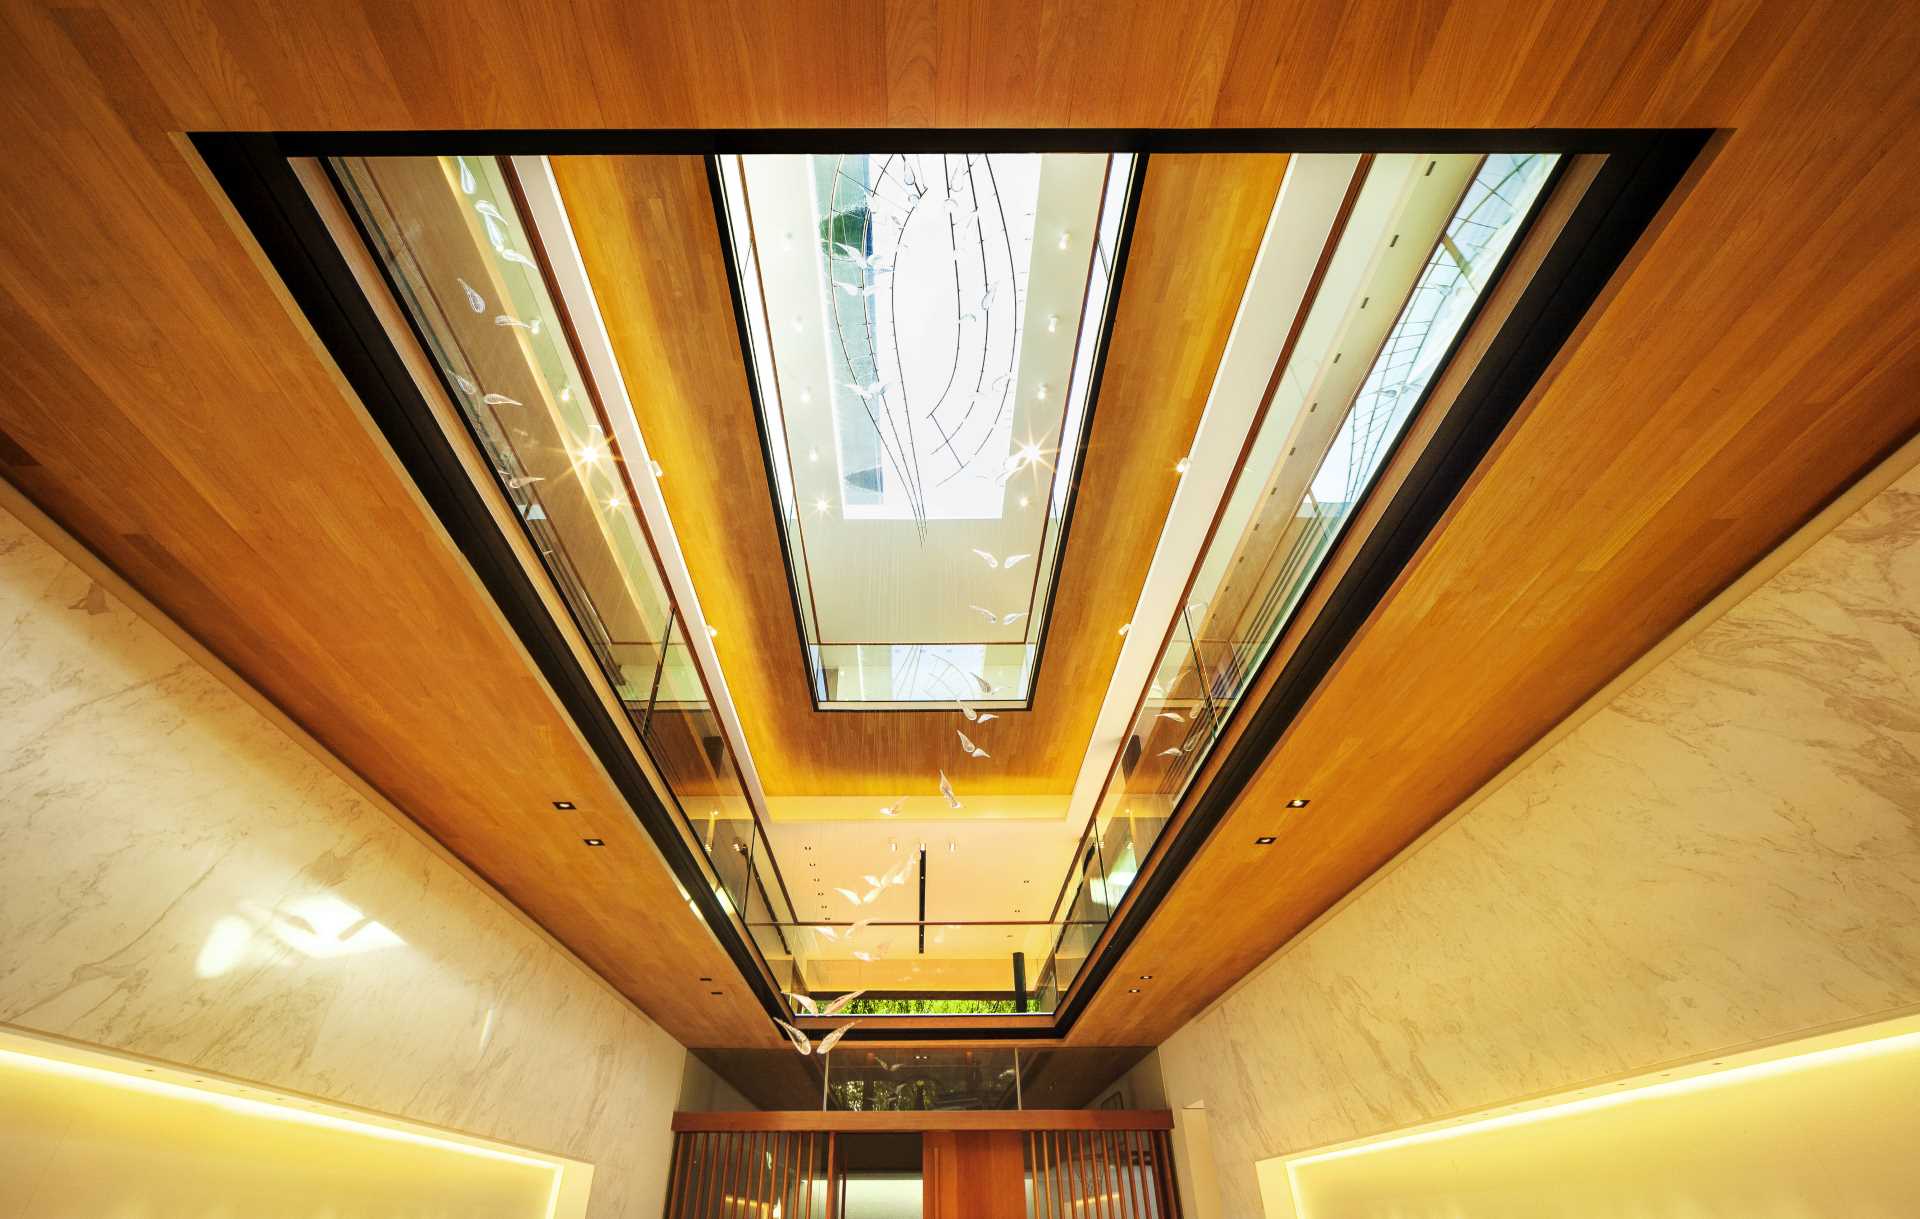 This modern house has a light filled central court with a glass window to the floor of the attic swimming pool which fills the house with light.